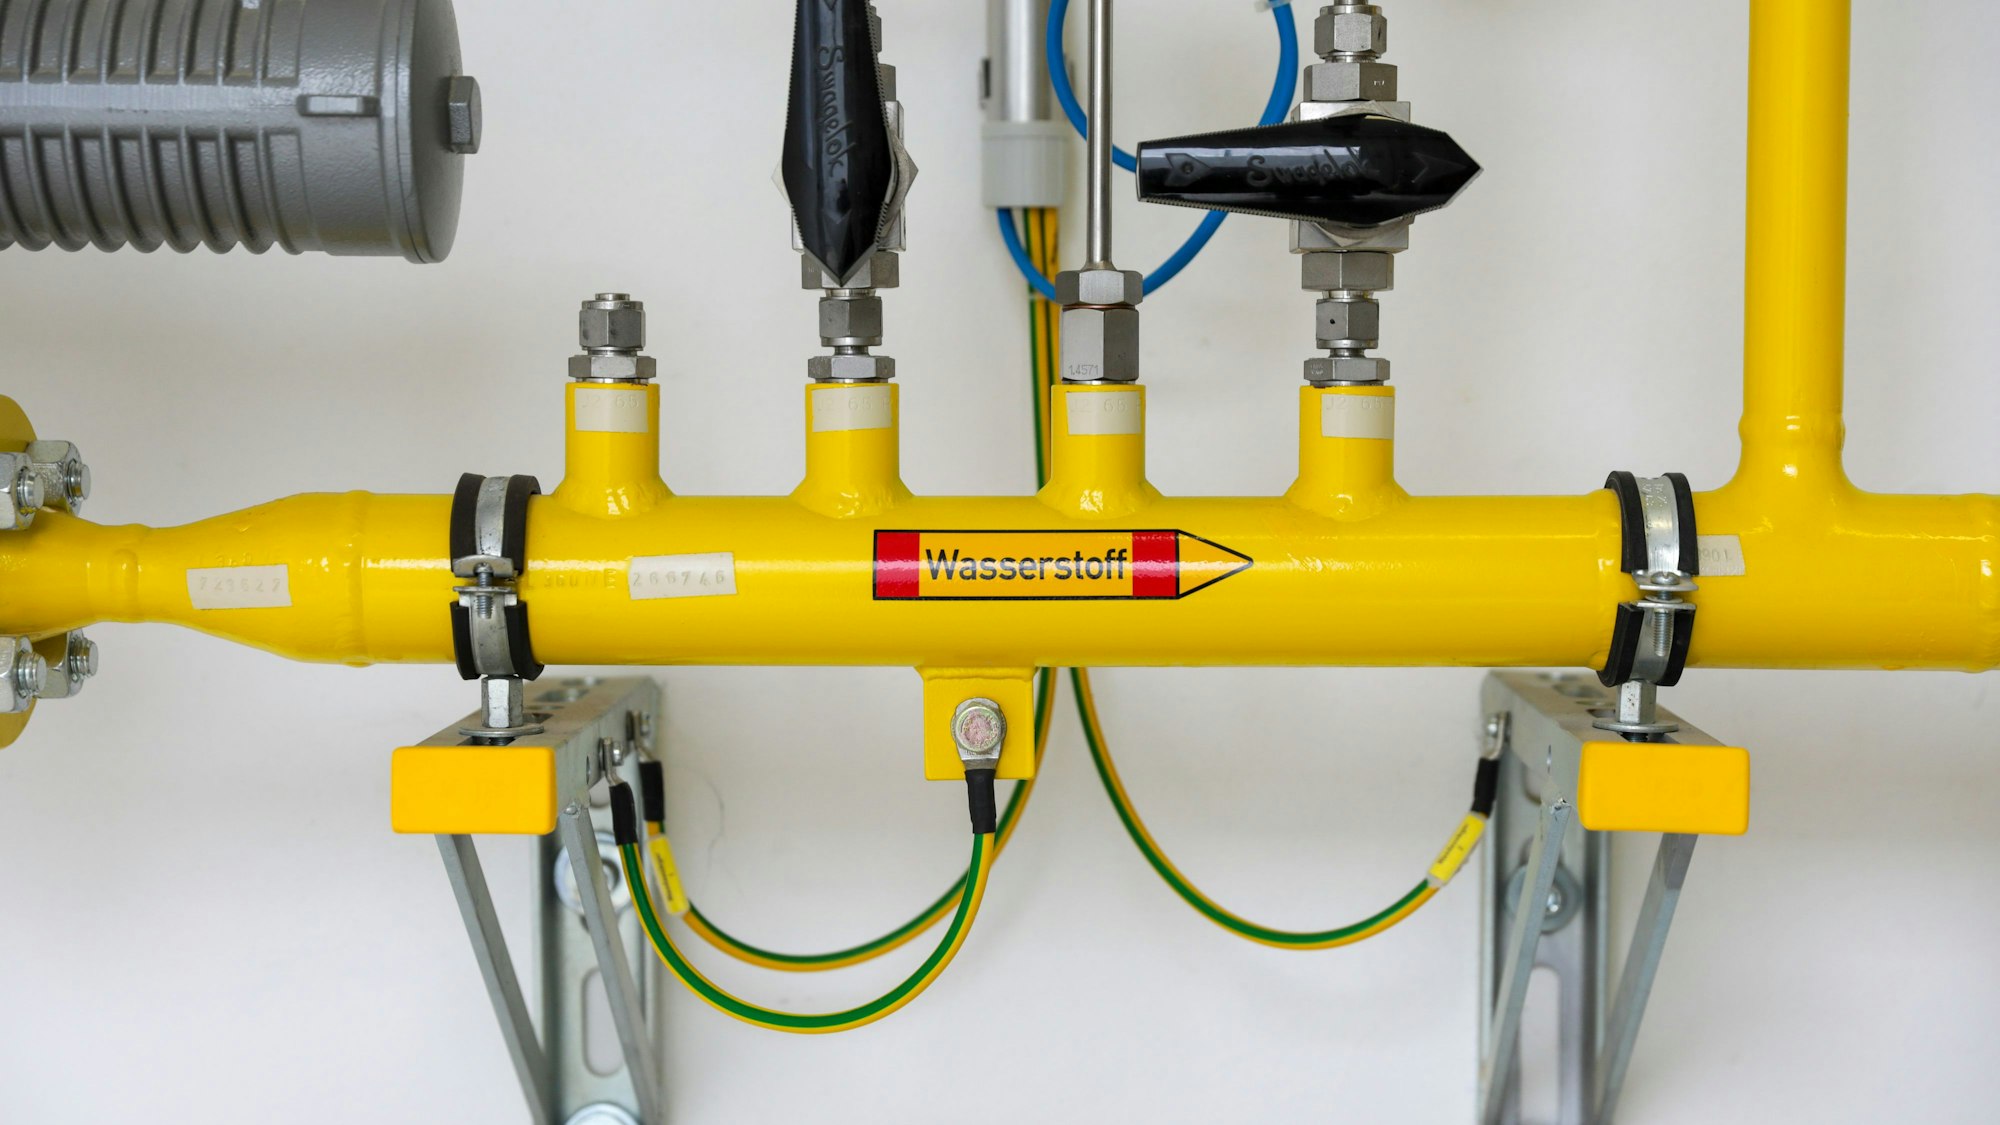 Yellow pipework carries Hydrogen in Germany.